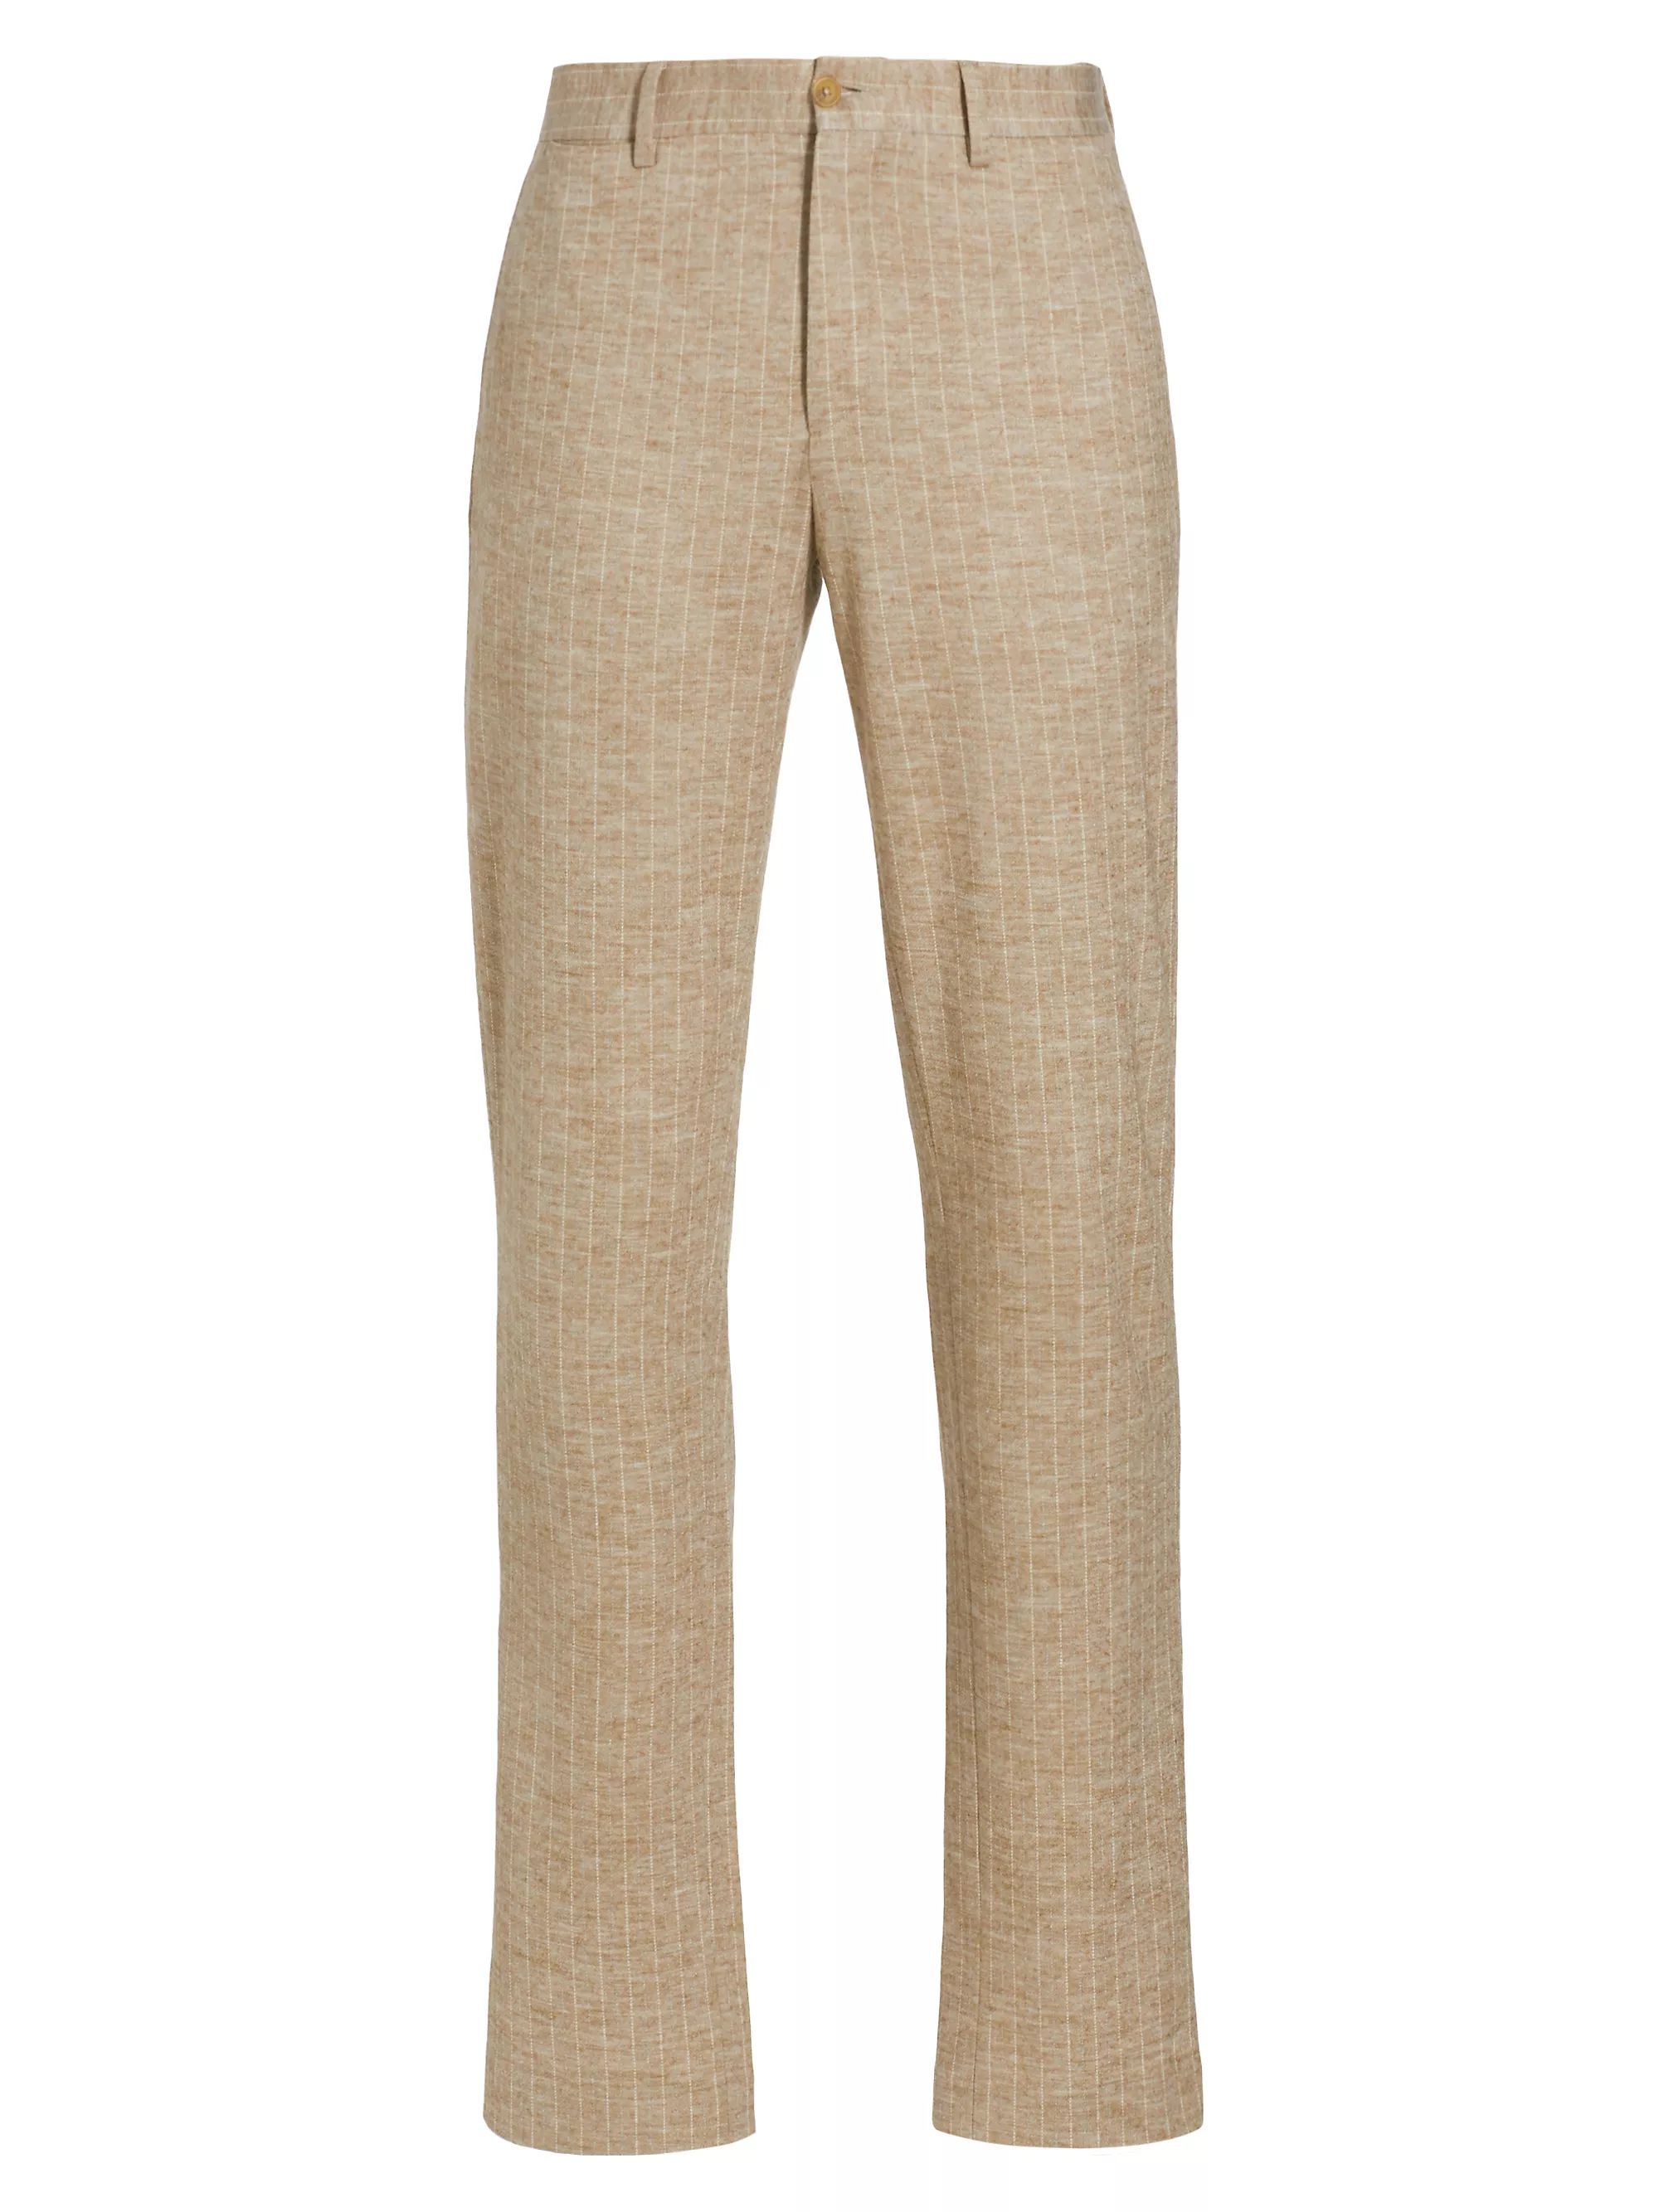 Shop Saks Fifth Avenue COLLECTION Pinstripe Knit Trousers | Saks Fifth Avenue | Saks Fifth Avenue